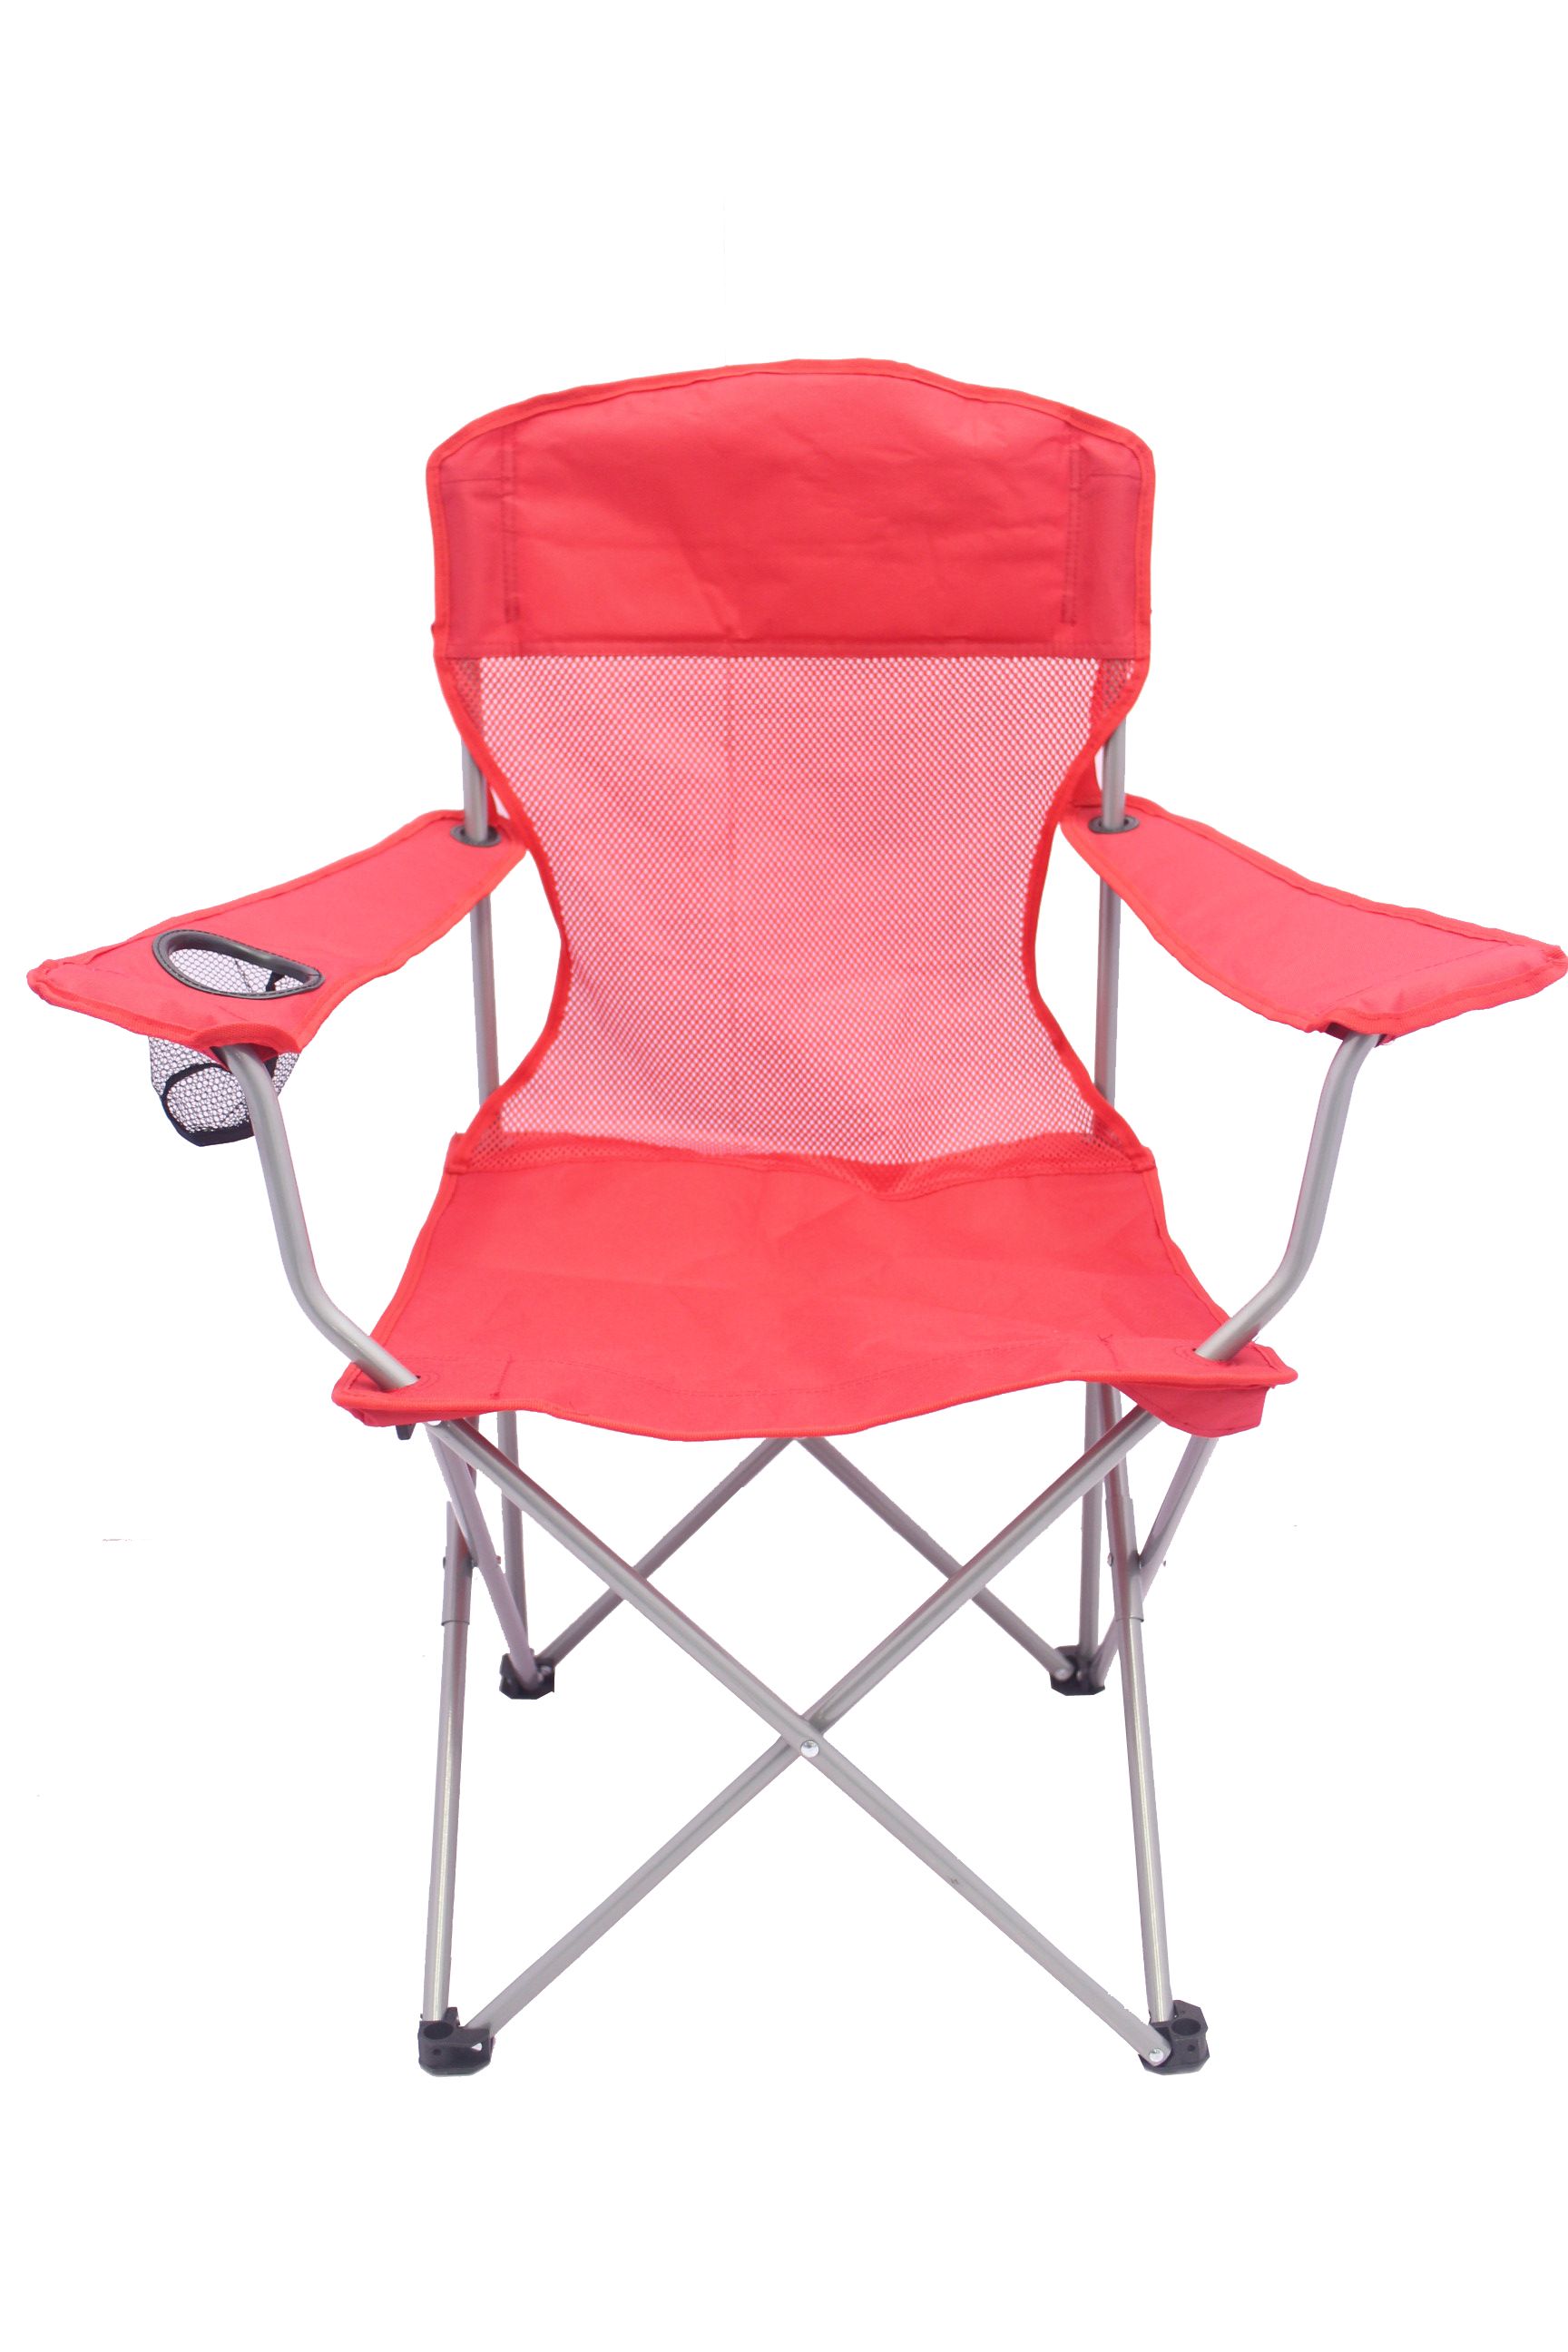 Ozark Trail Basic Mesh Chair, Red, Adult - image 5 of 10